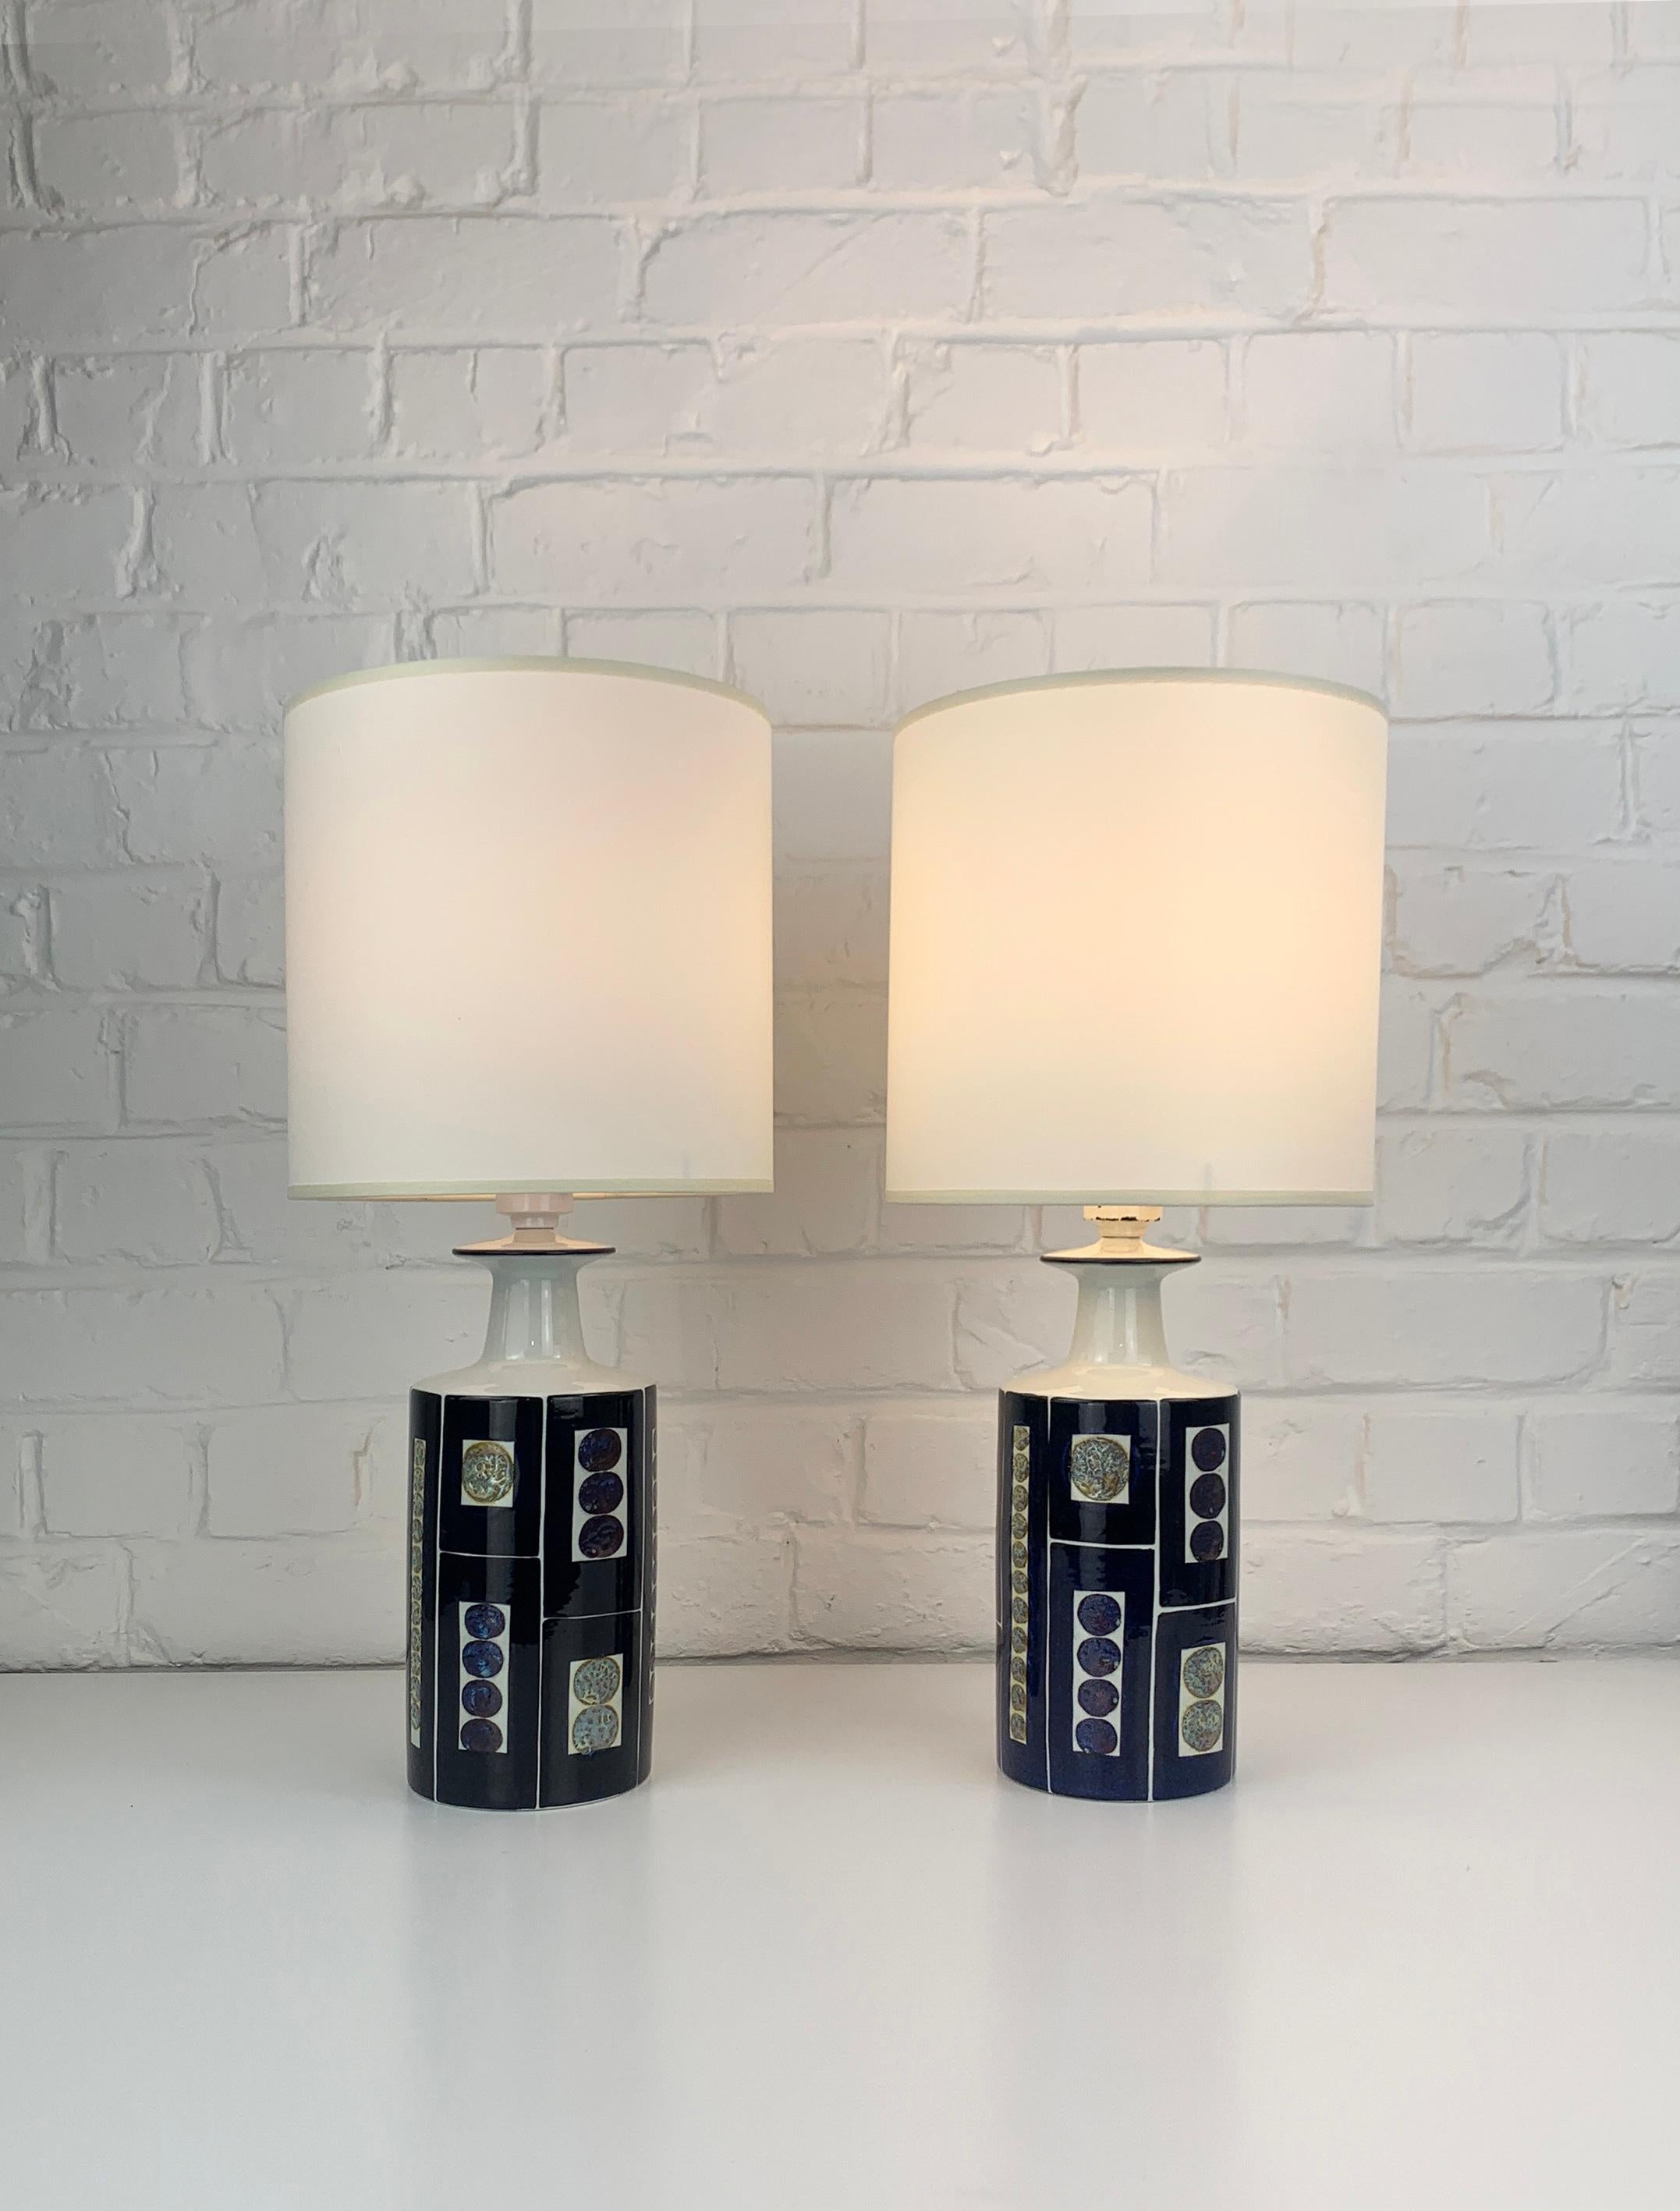 Pair table lamps from the late 1960s or early 1970s. These lamps have been manufactured by Royal Copenhagen and sold by Fog & Mørup, Denmark. 

Impressive bold graphic design by Inge-Lise Koefoed, featuring a decor in dark blue with greyish / beige